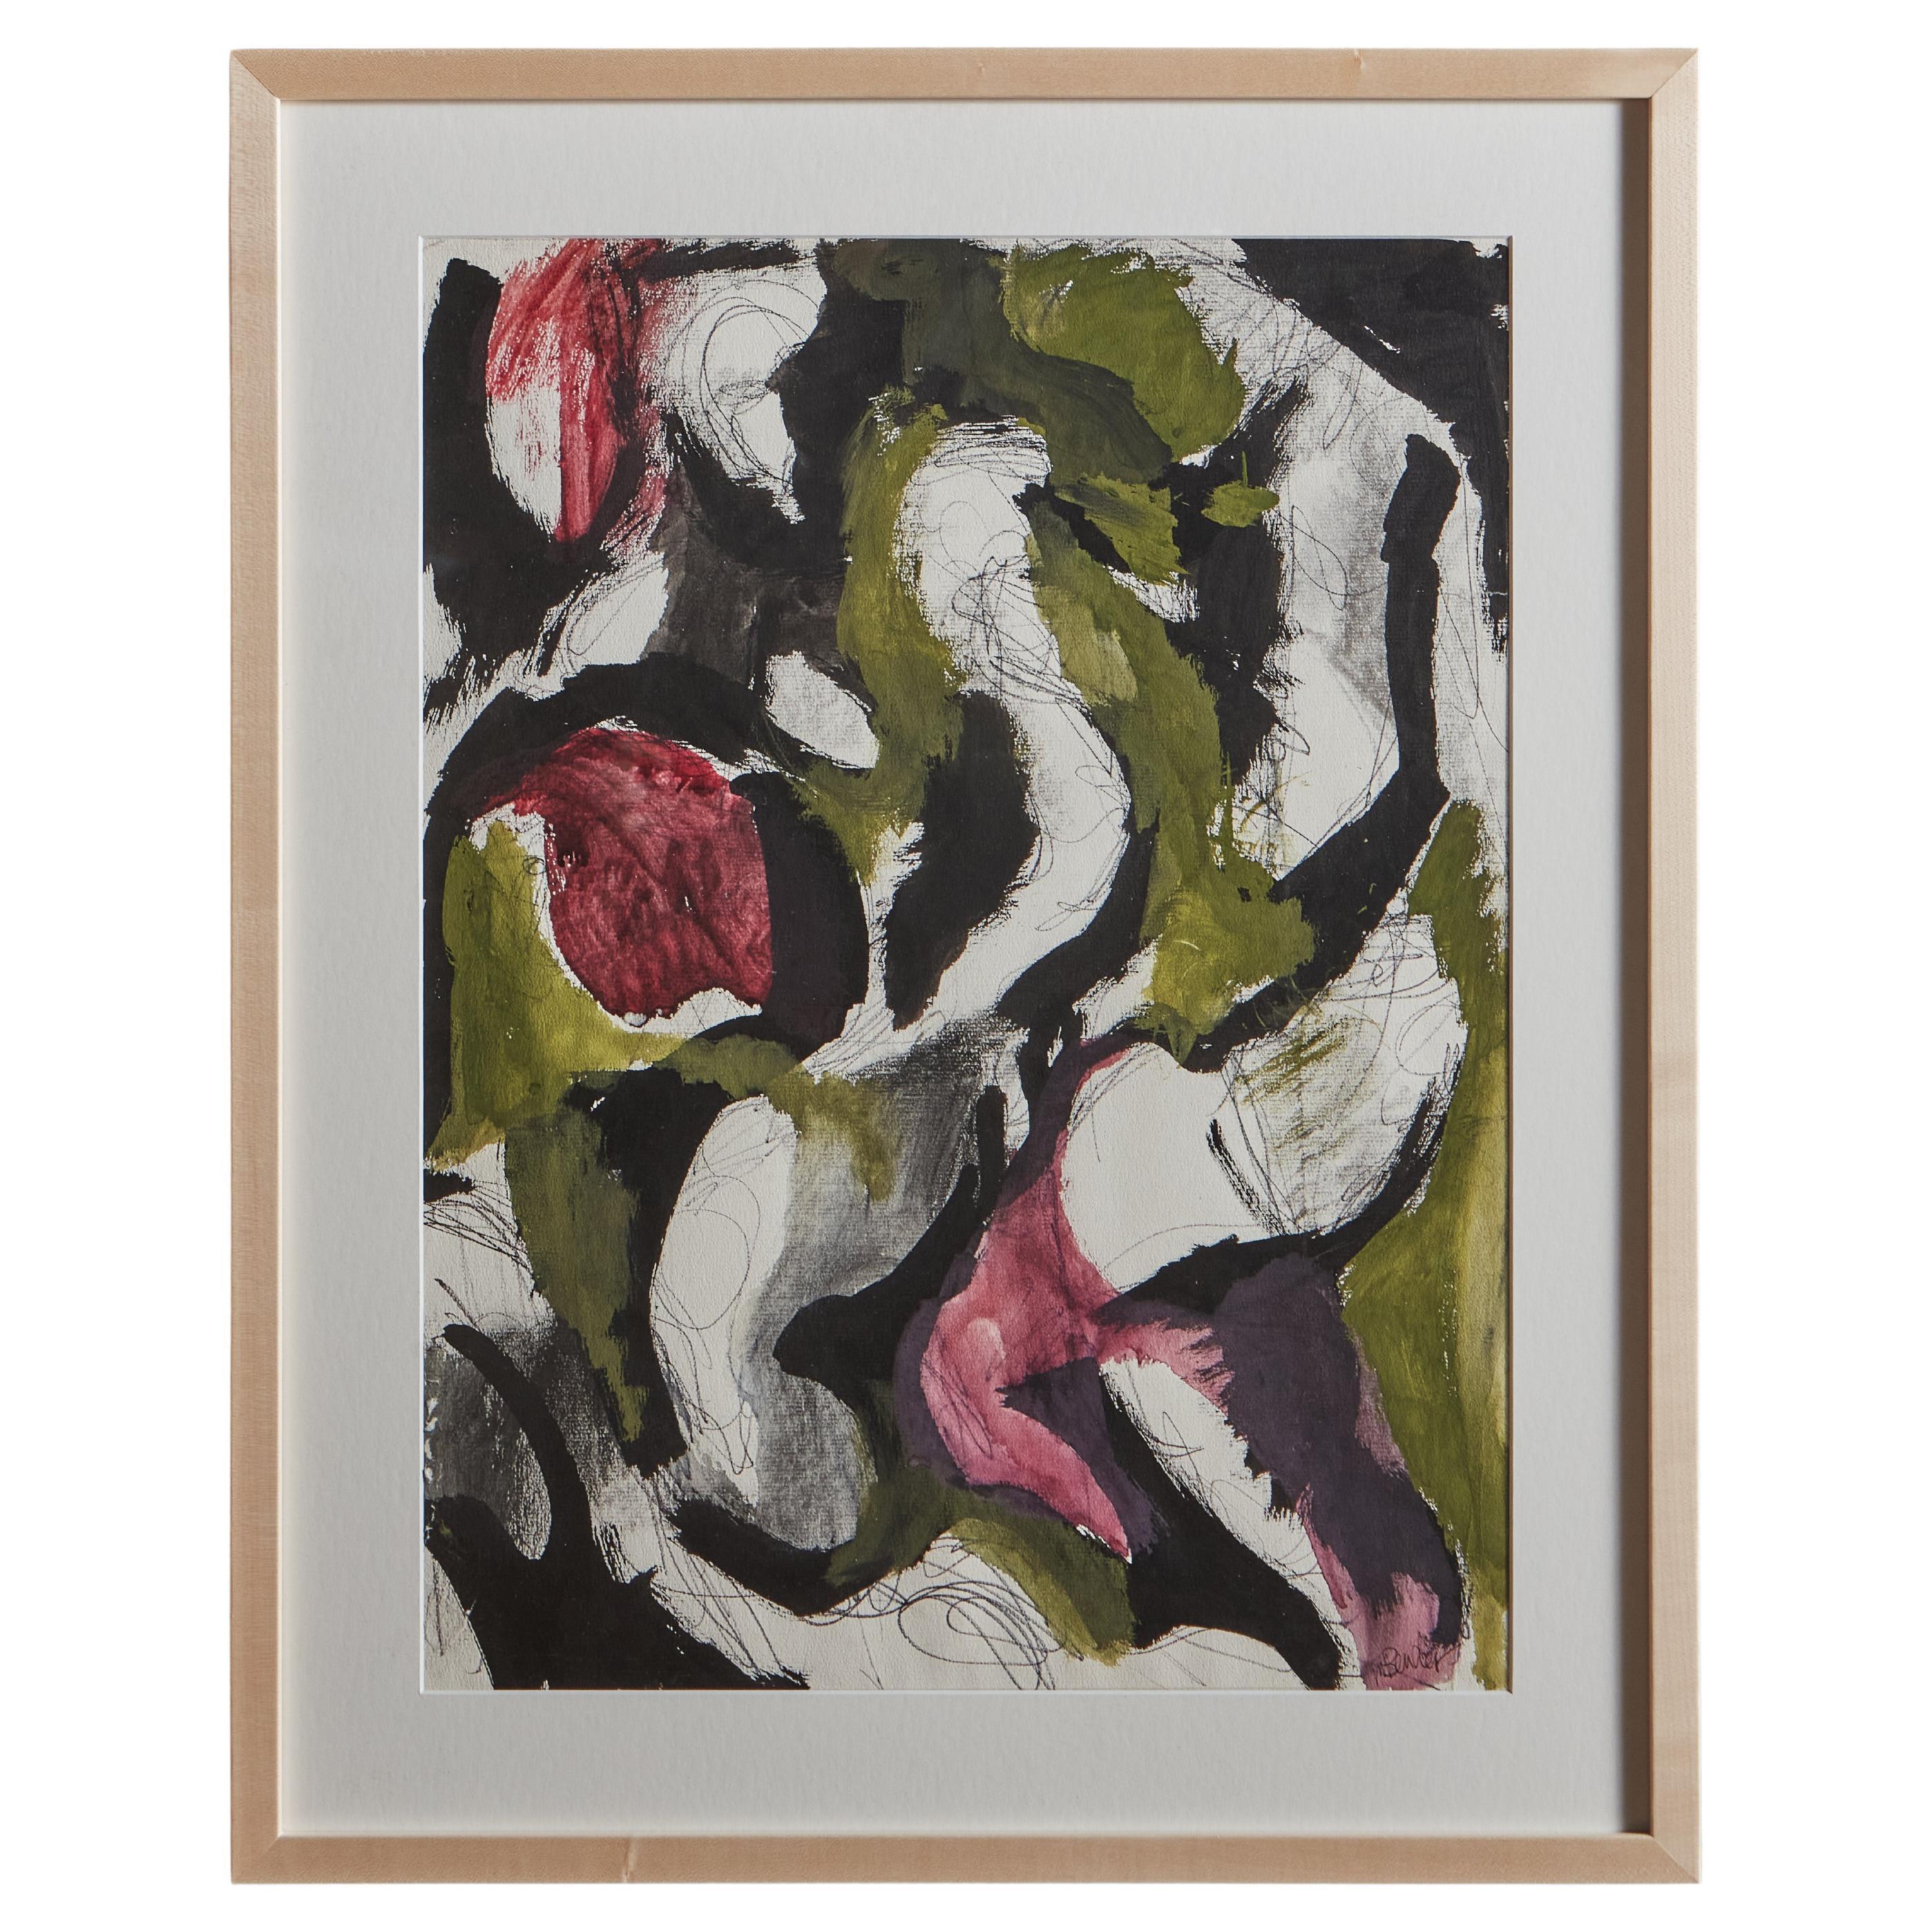 Framed Abstract Watercolor by May Bender, Late 20th Century